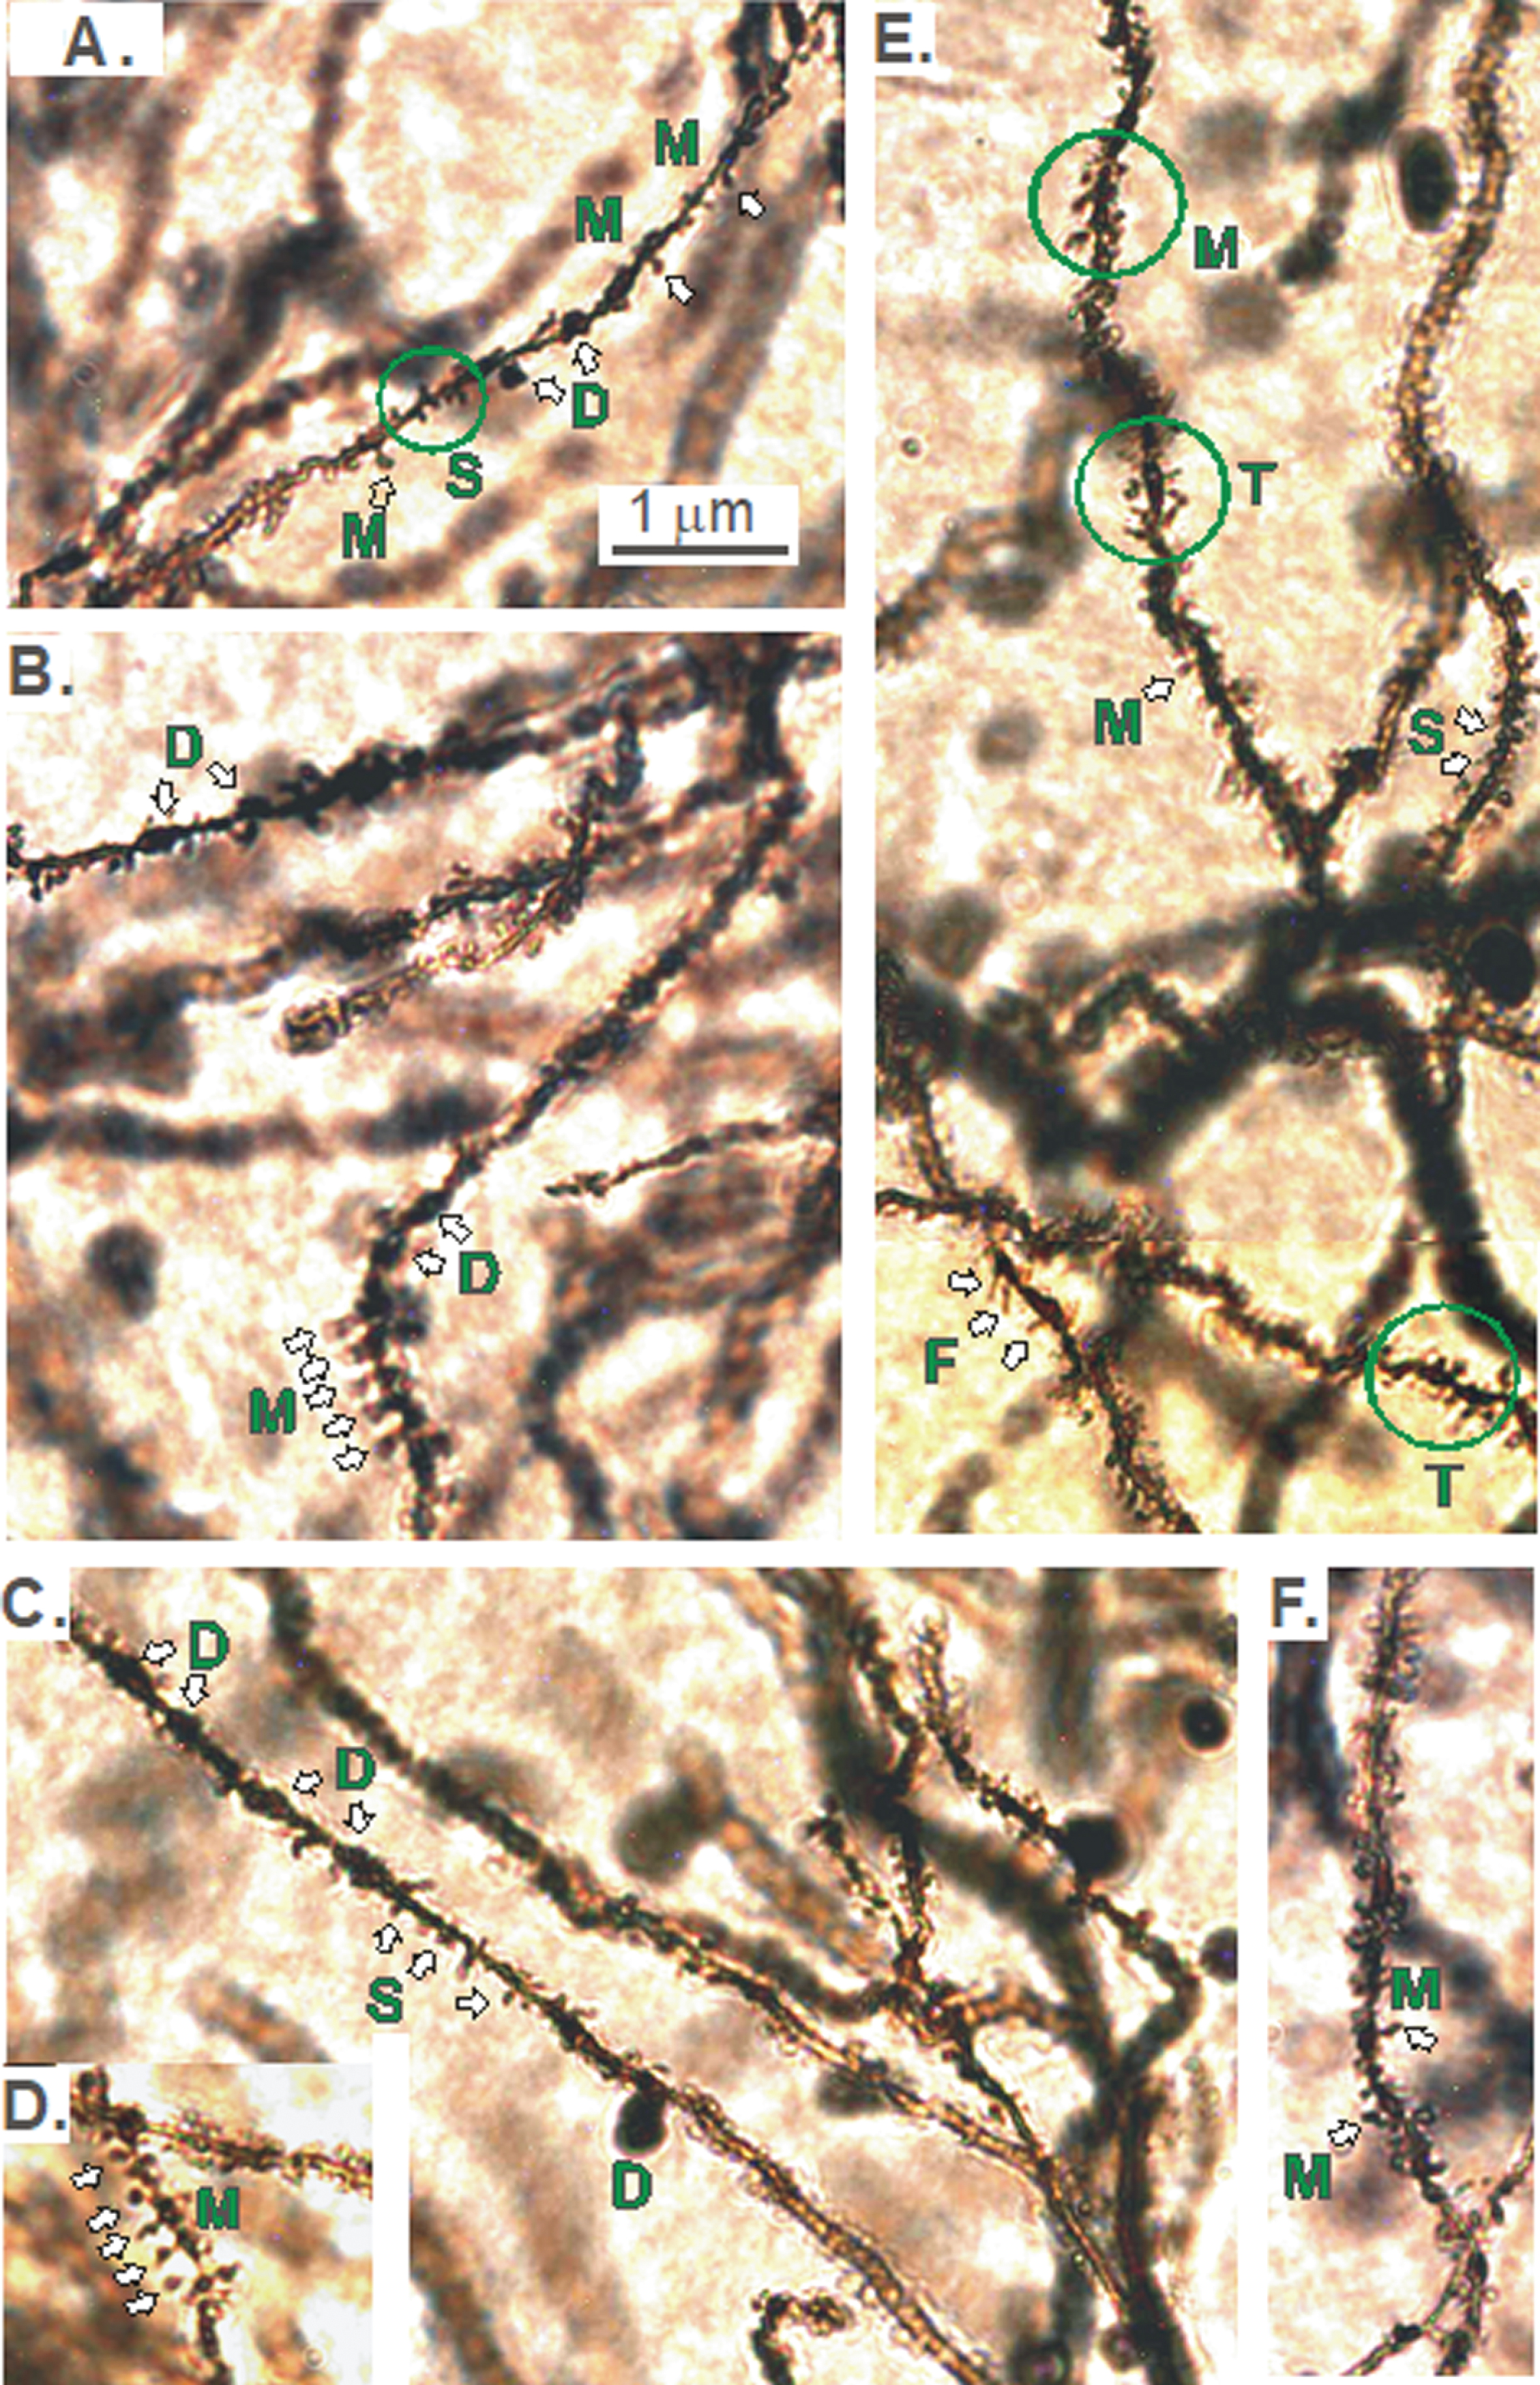 A-F). Different types of spines on dendrites originating from CA1 pyramidal cell bodies. The reduction in the dorsal CA1 region arborization in KO versus WT mice (Figs. 2–5) prompted the question of whether spine density was reduced and if so, were specific types of spines lost. Dendritic spines are most commonly mushroom-shaped (M). Other types are thin (T), filapodic (F), or stubby (S). The dendrite itself may also be dilated (D).